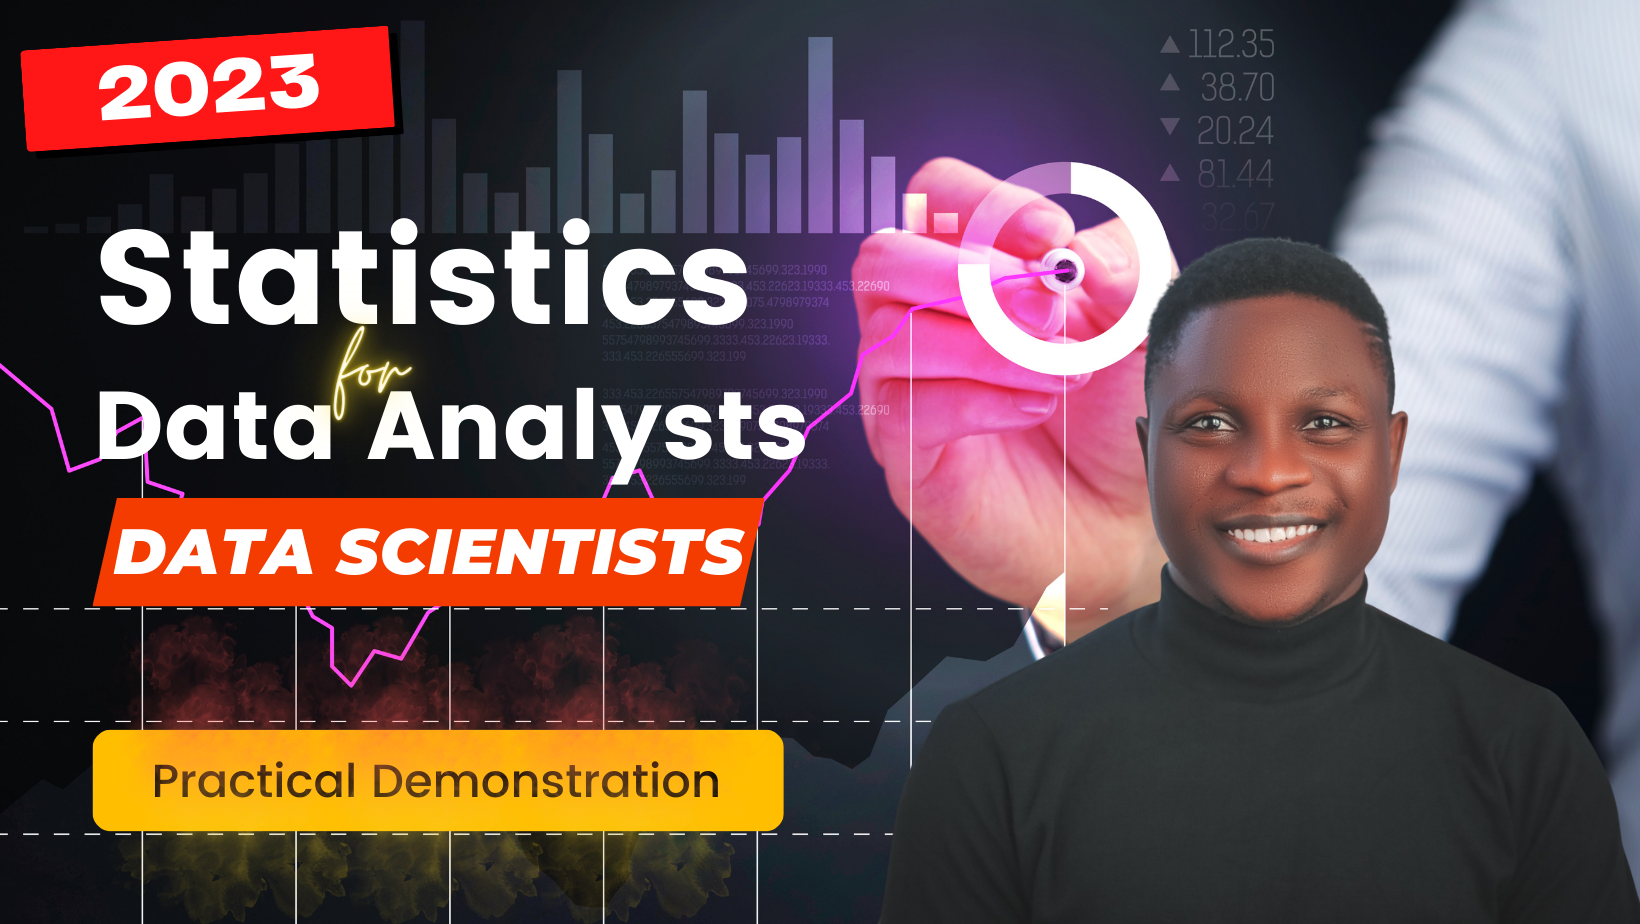 Statistics for Data Analysts and Scientists 2023